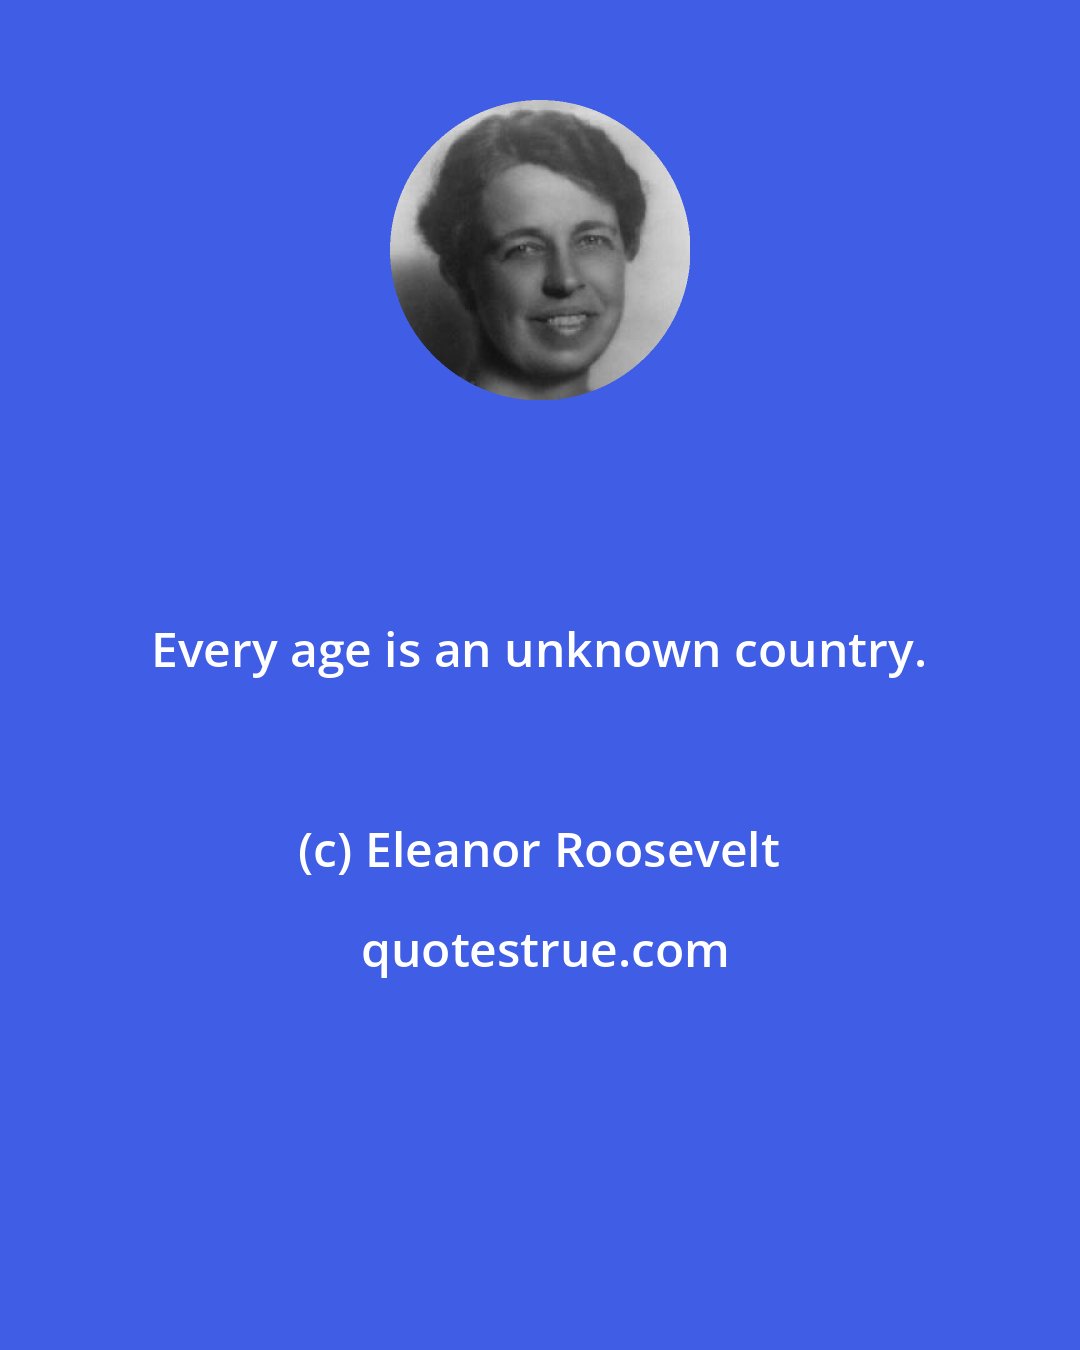 Eleanor Roosevelt: Every age is an unknown country.